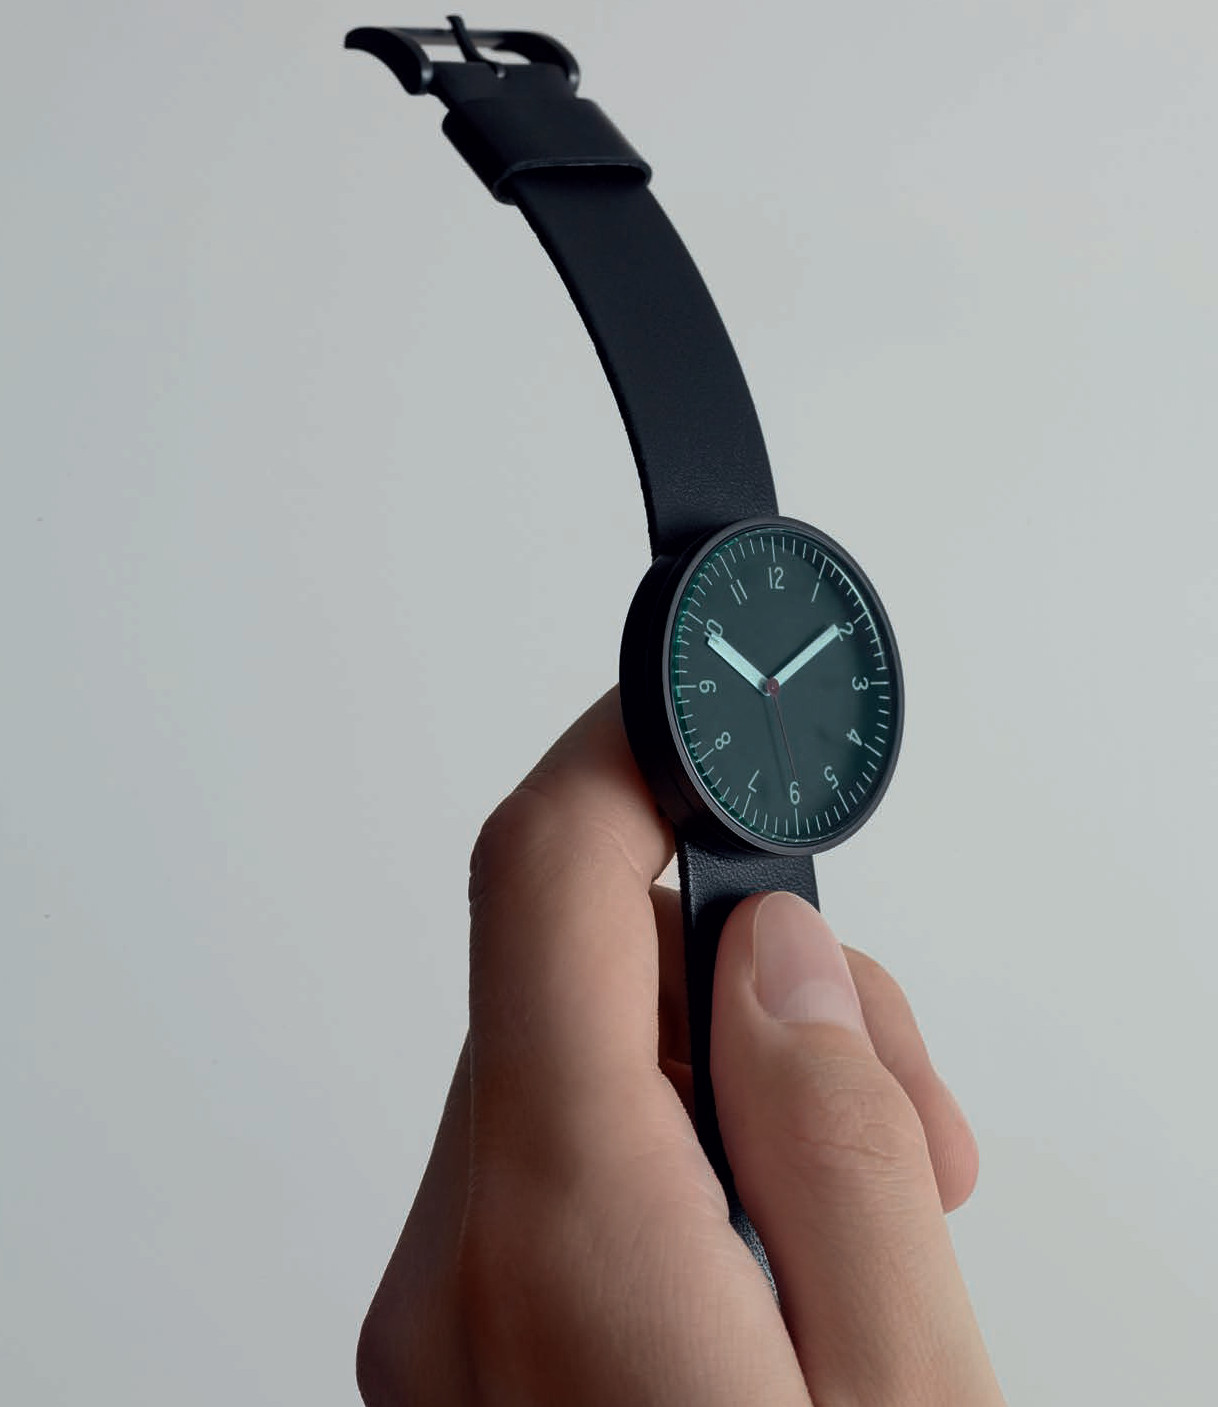 The Circumference Watch, 2007 by Industrial Facility for Muji